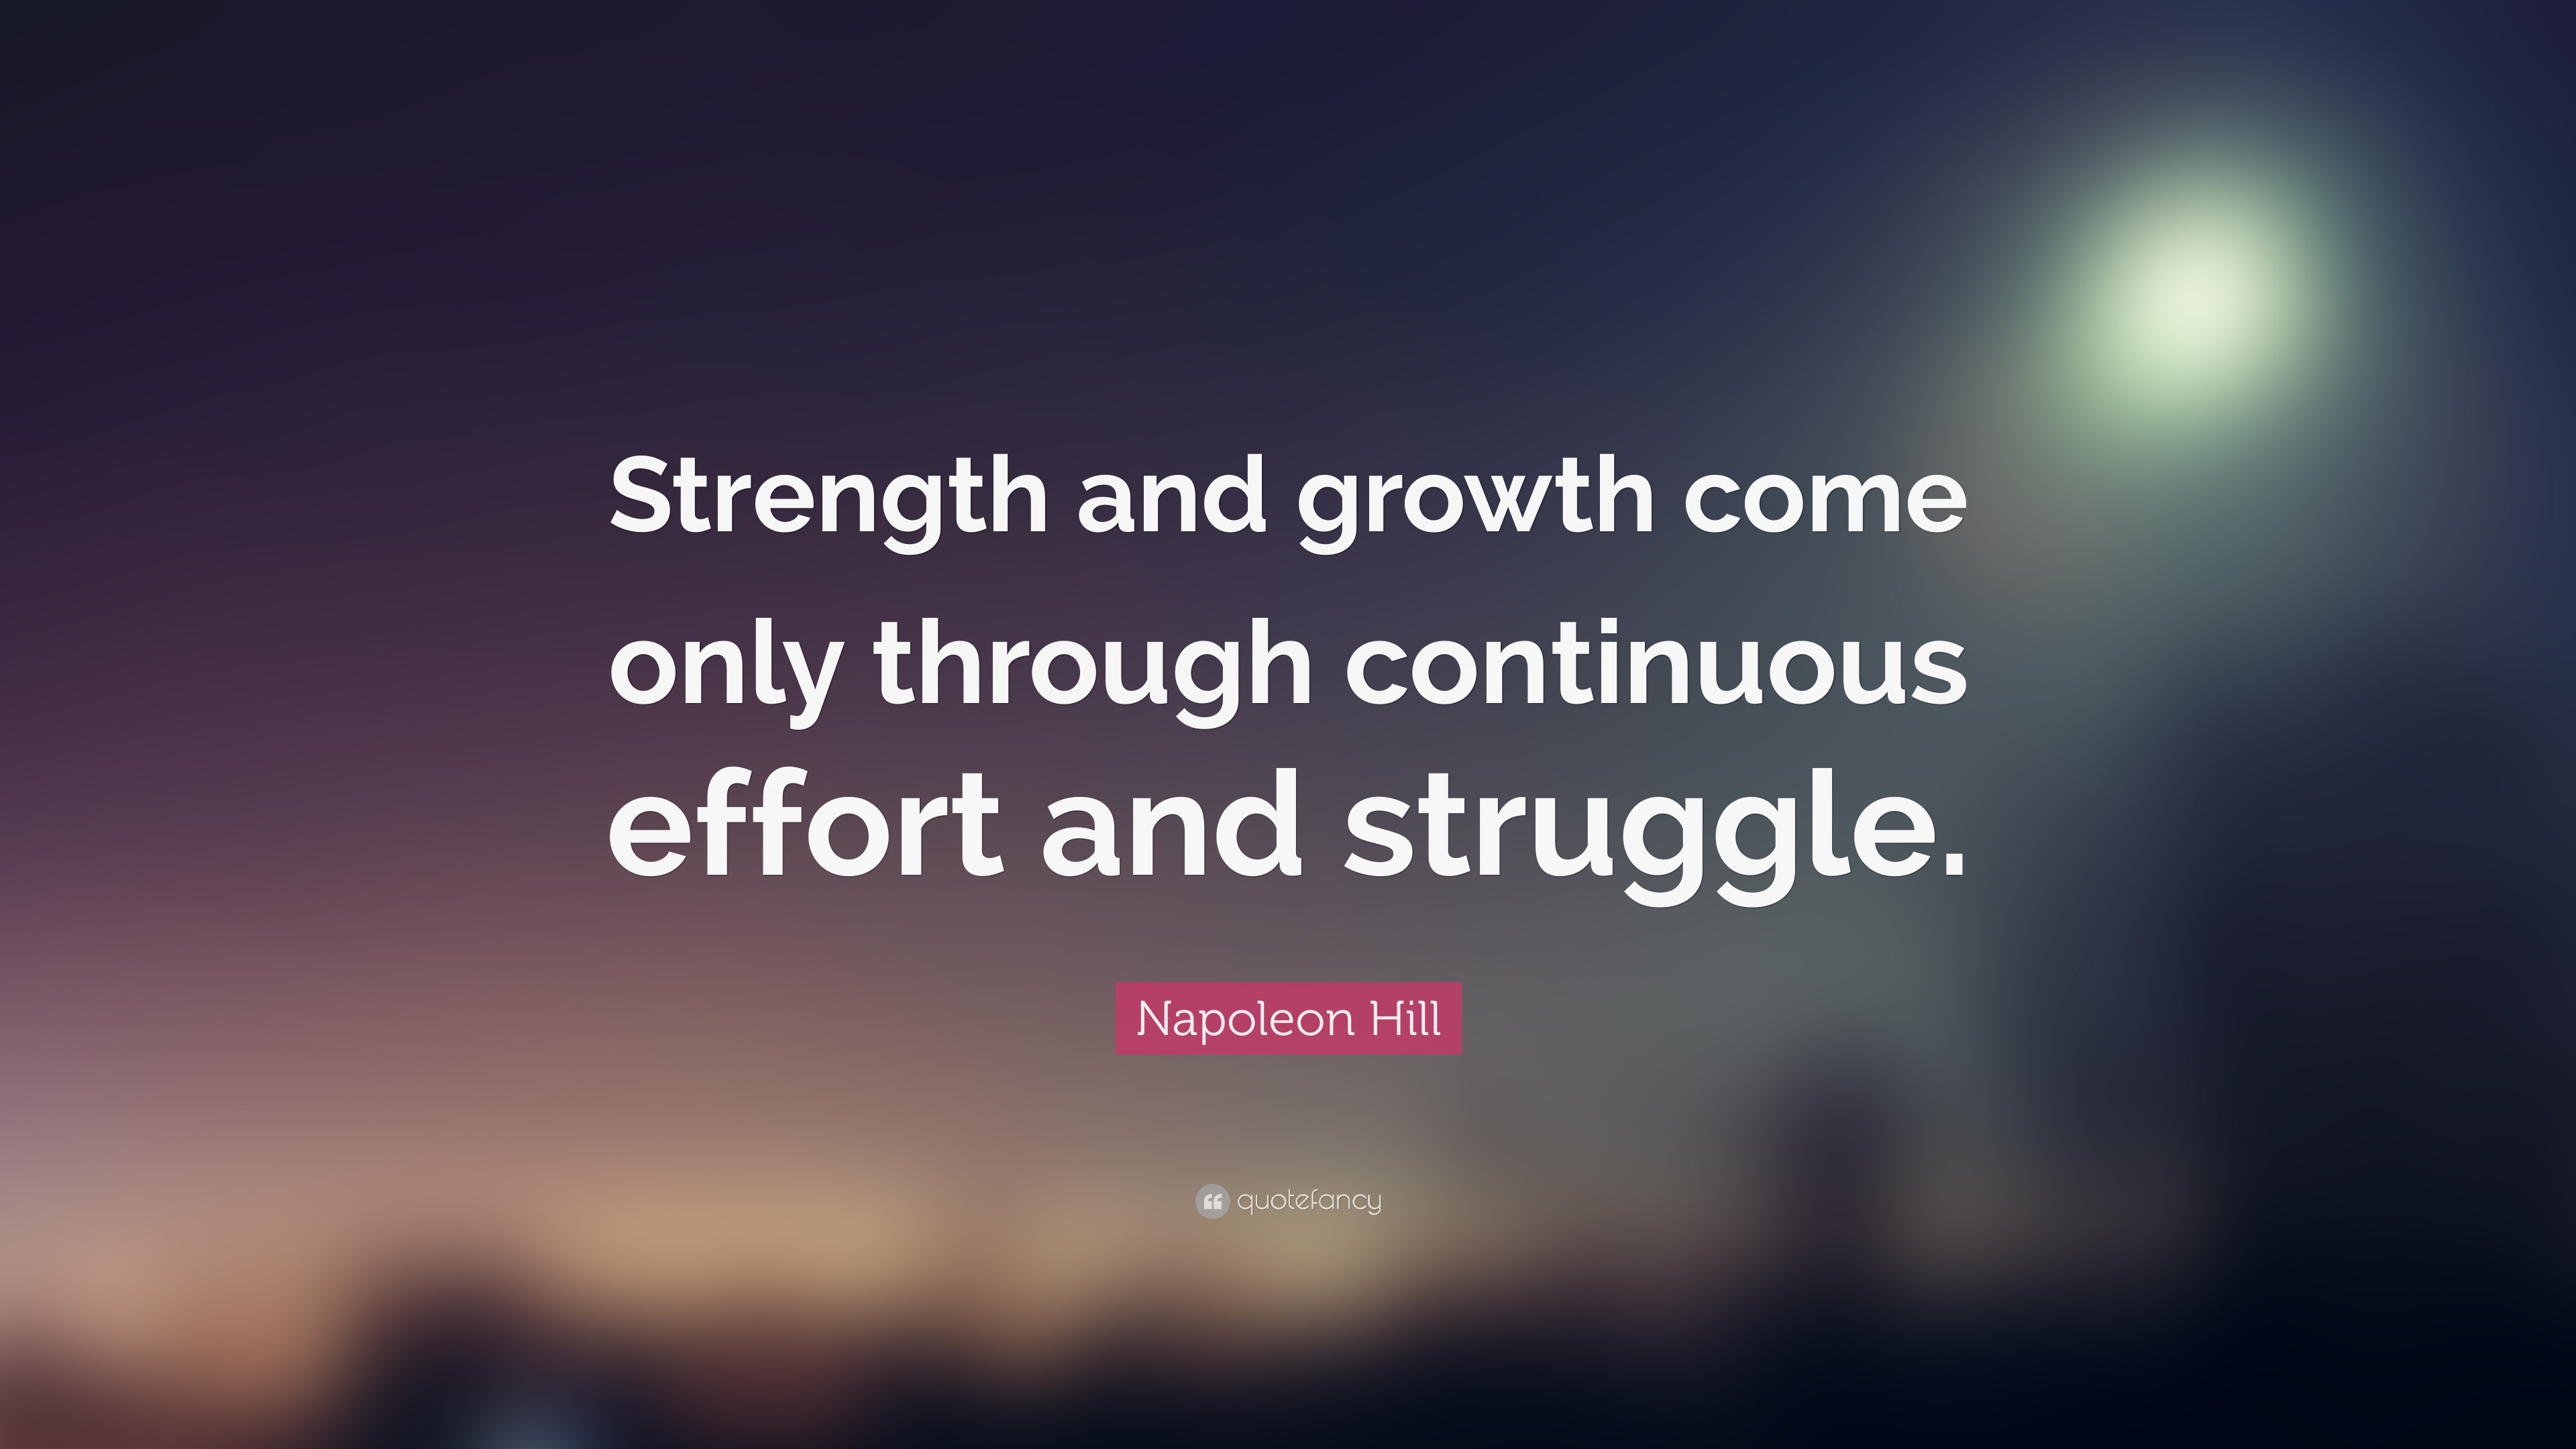 Napoleon Hill Quote: “Strength and growth come only through continuous